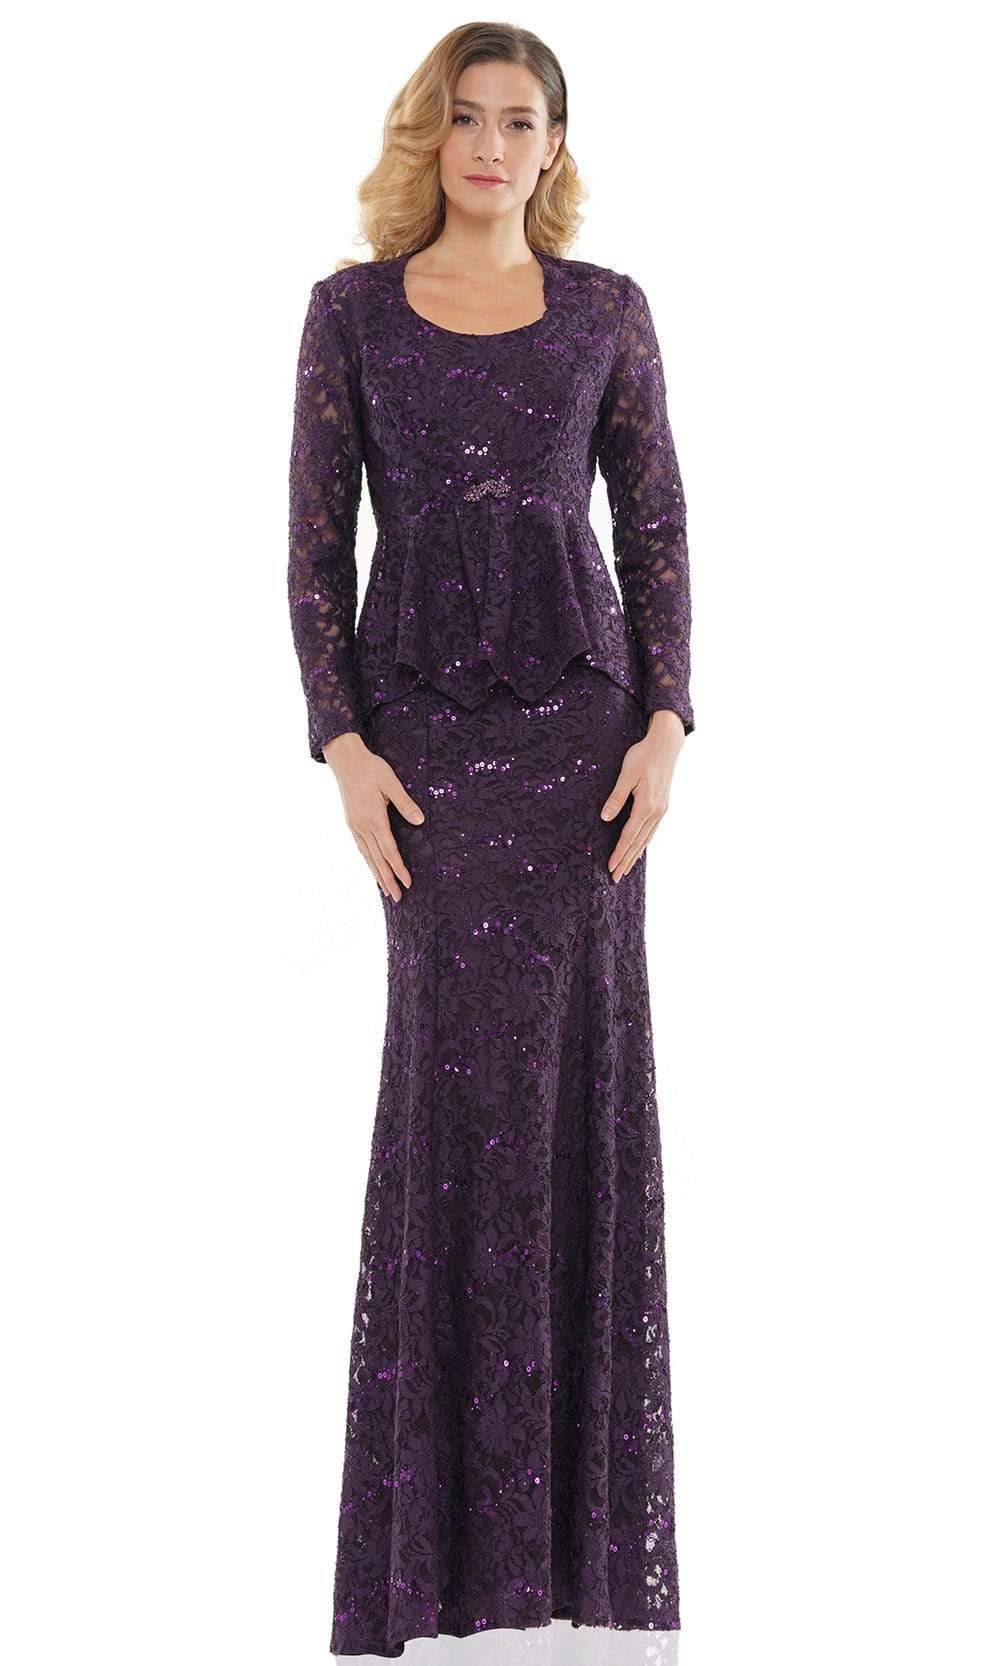 Marsoni by Colors - M301 Scoop Fit and Flare Evening Dress Mother of the Bride Dresses 6 / Eggplant